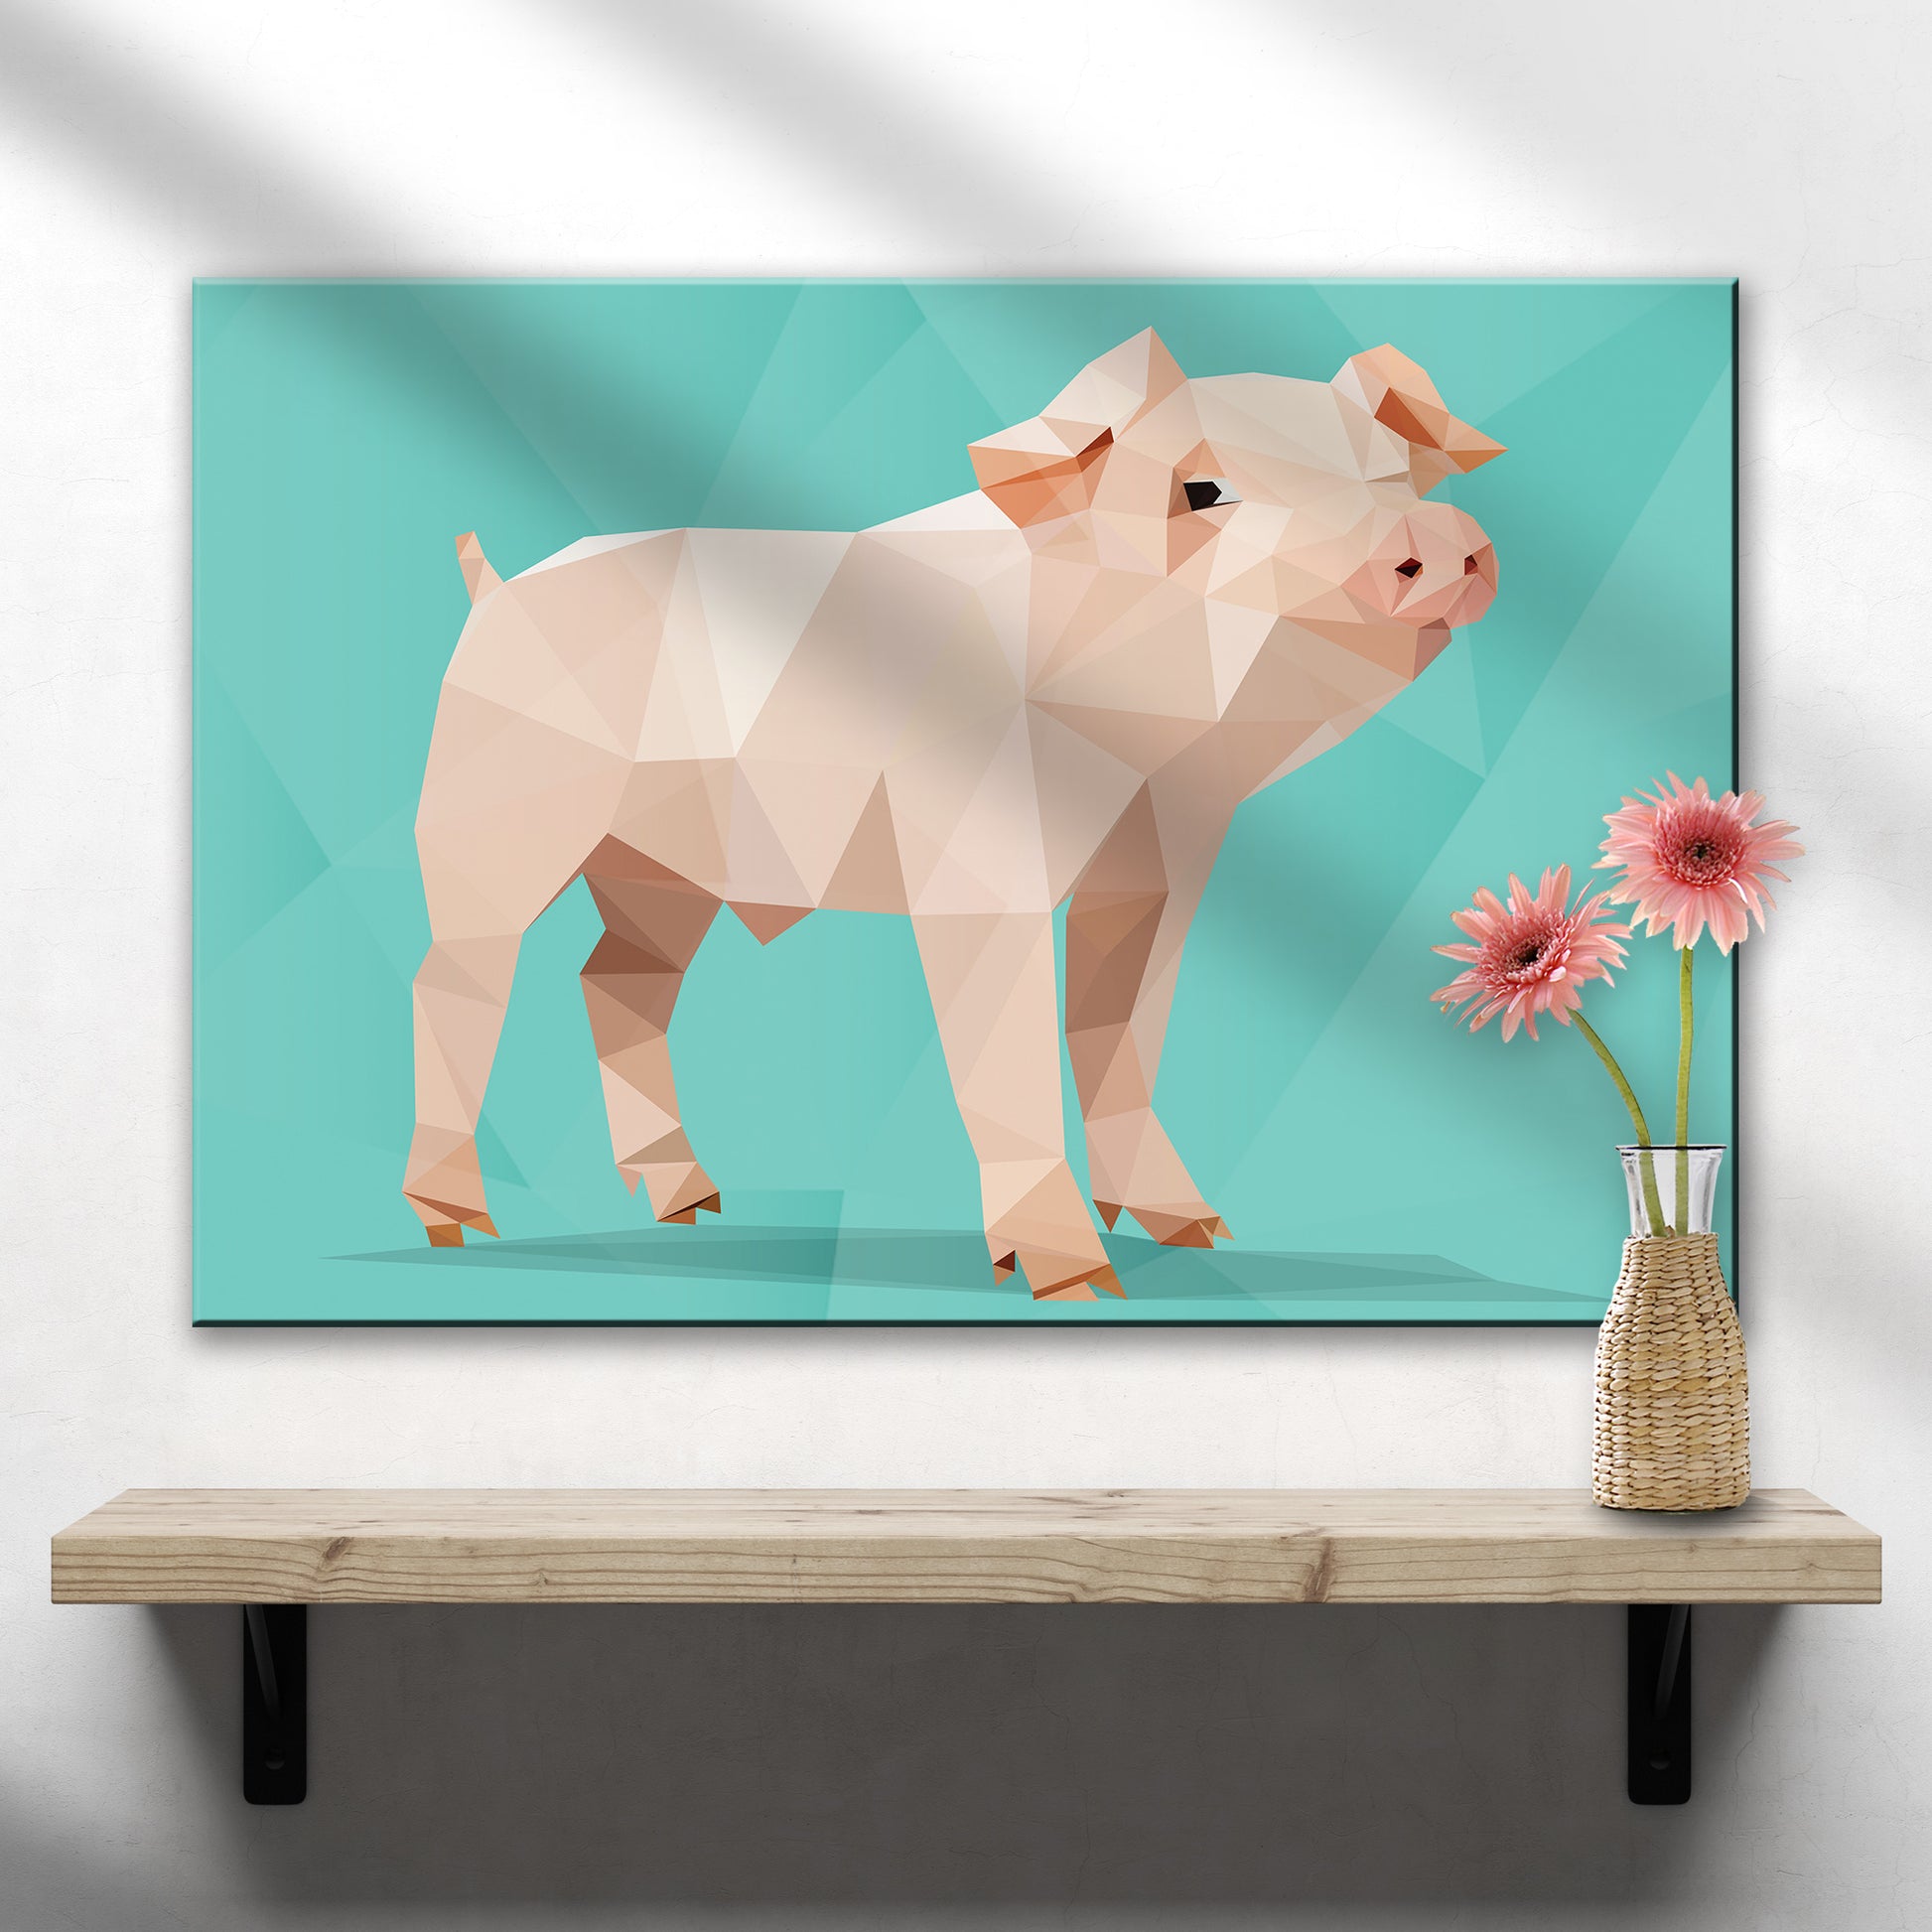 Lovely Geometric Pig Canvas Wall Art - Image by Tailored Canvases